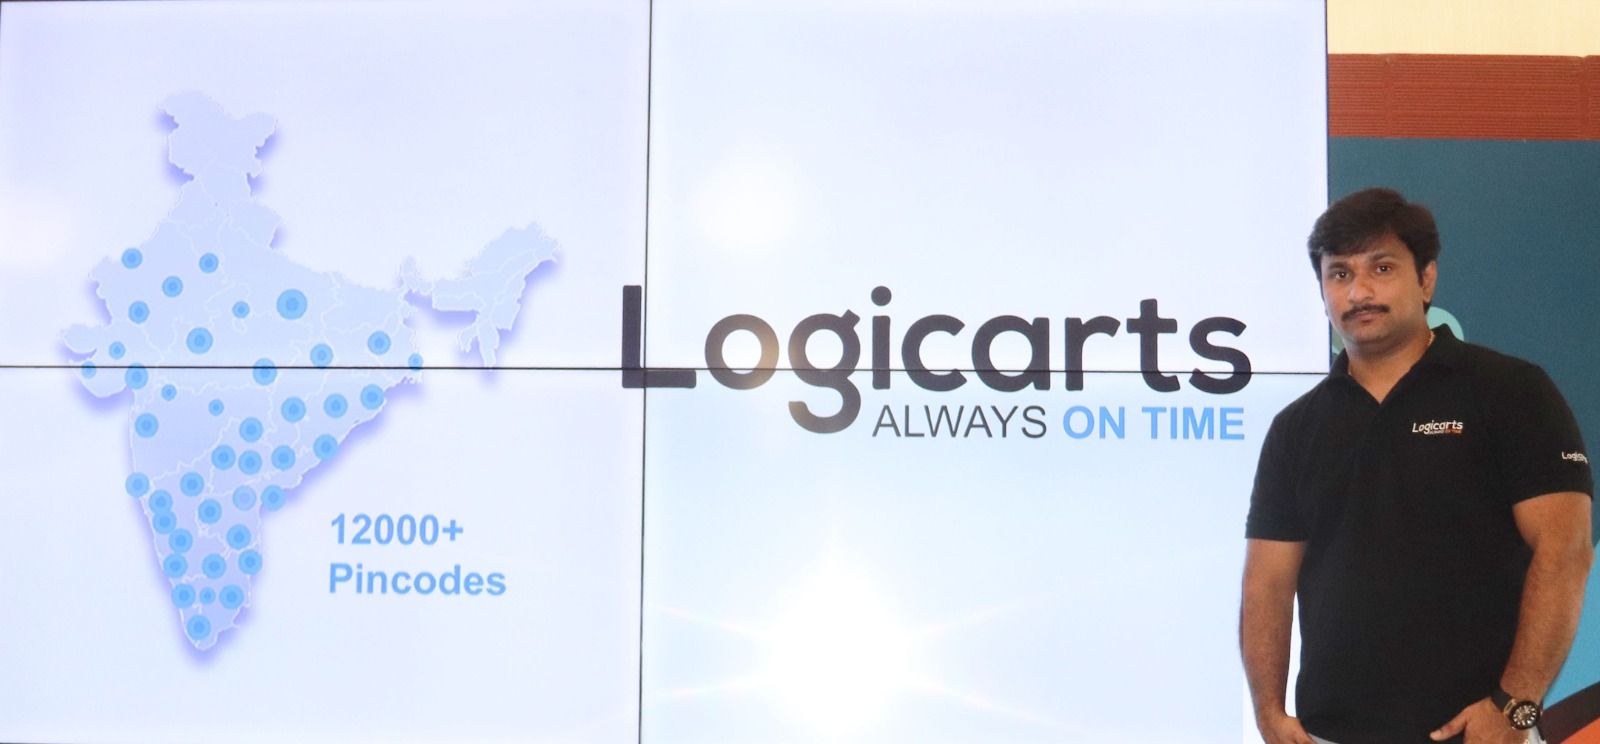 Meet Logicarts, the new face of last-mile deliveries for bulky shipments

